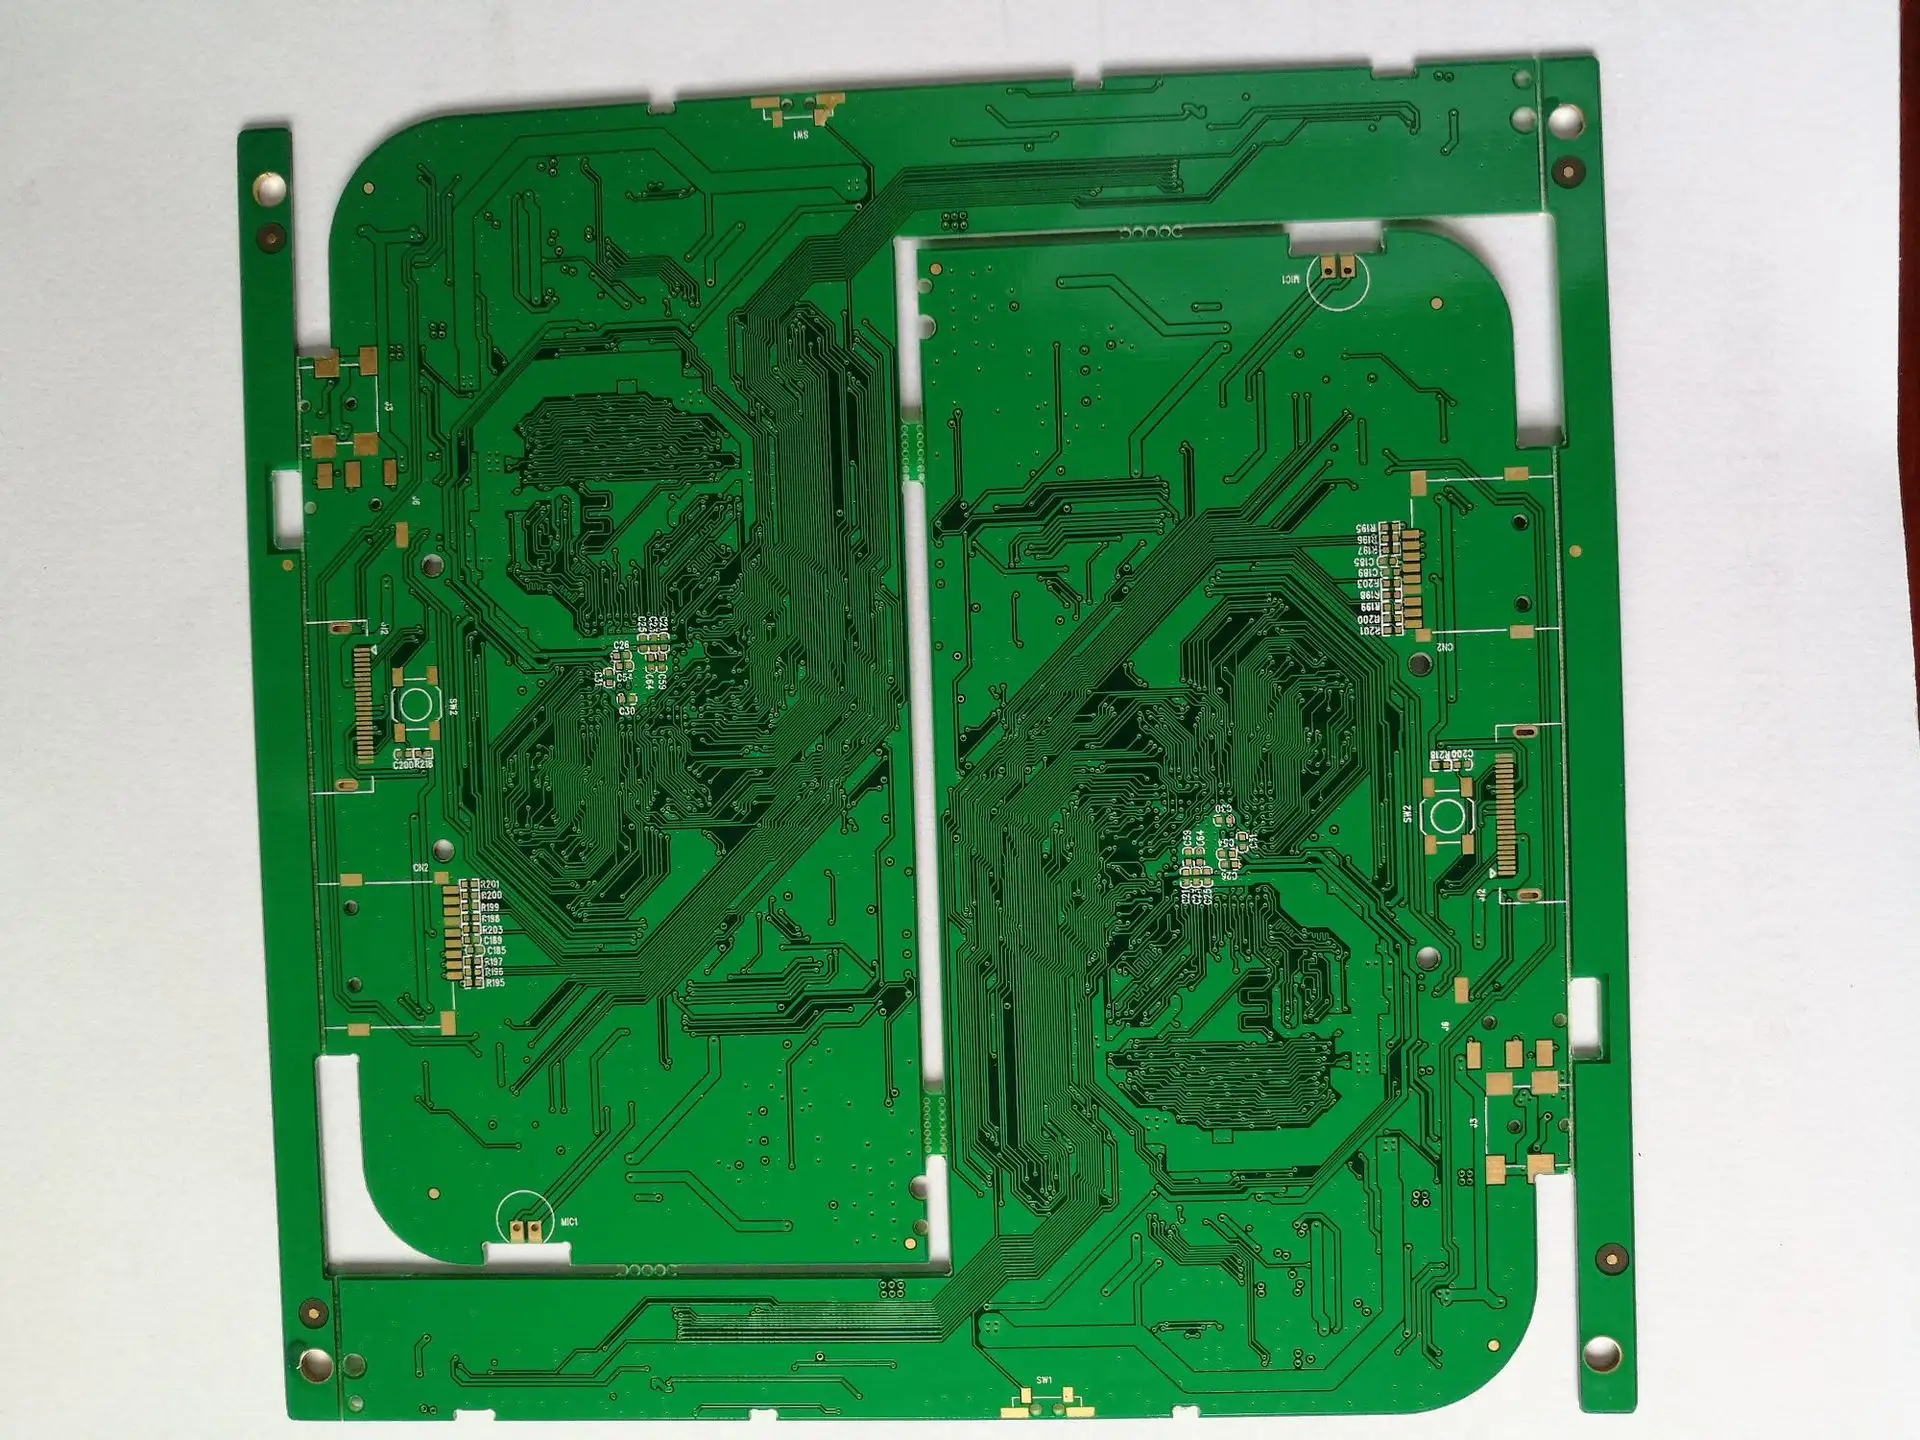 How to solve the abnormal PCB processing? The industry tries to solve it